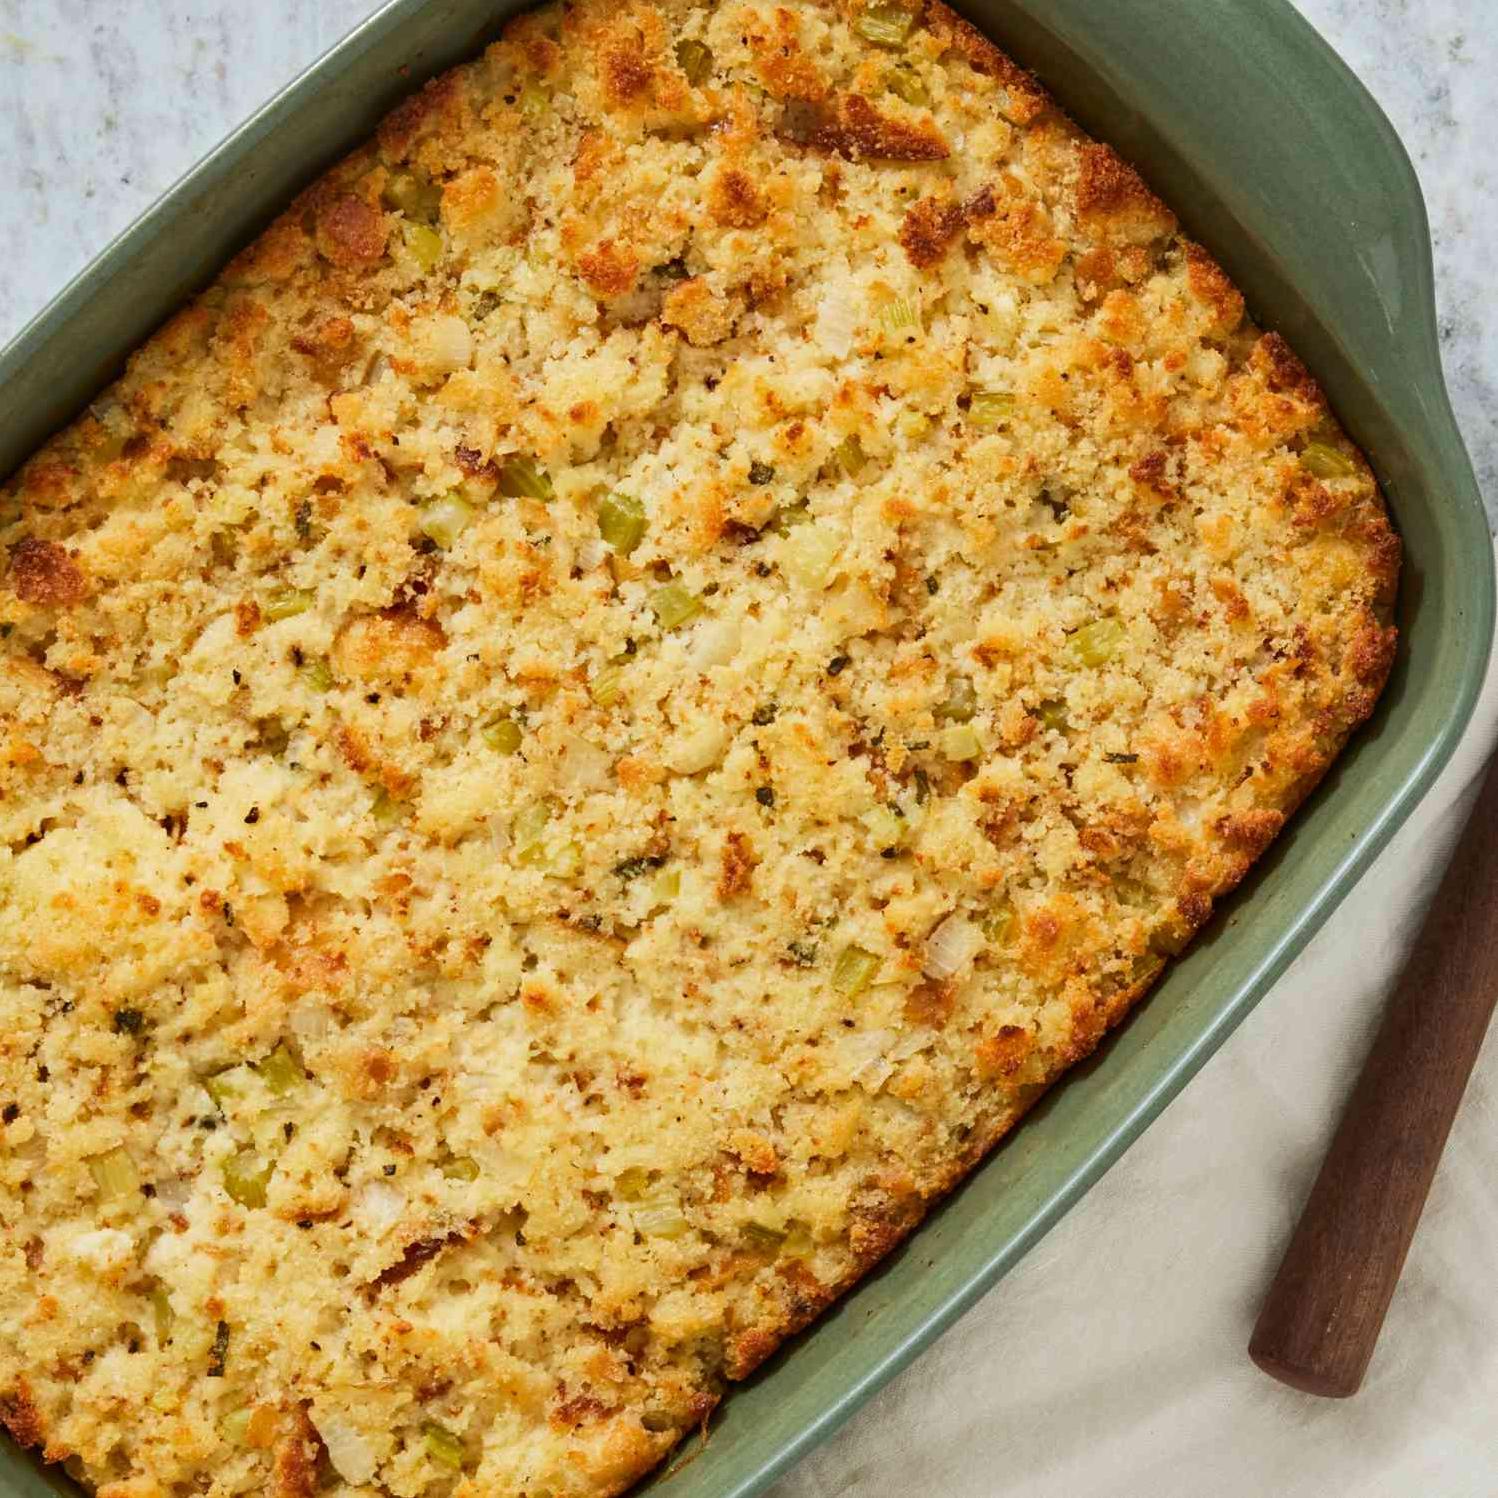  Fluffy and golden, this cornbread dressing is the ultimate Southern comfort food.